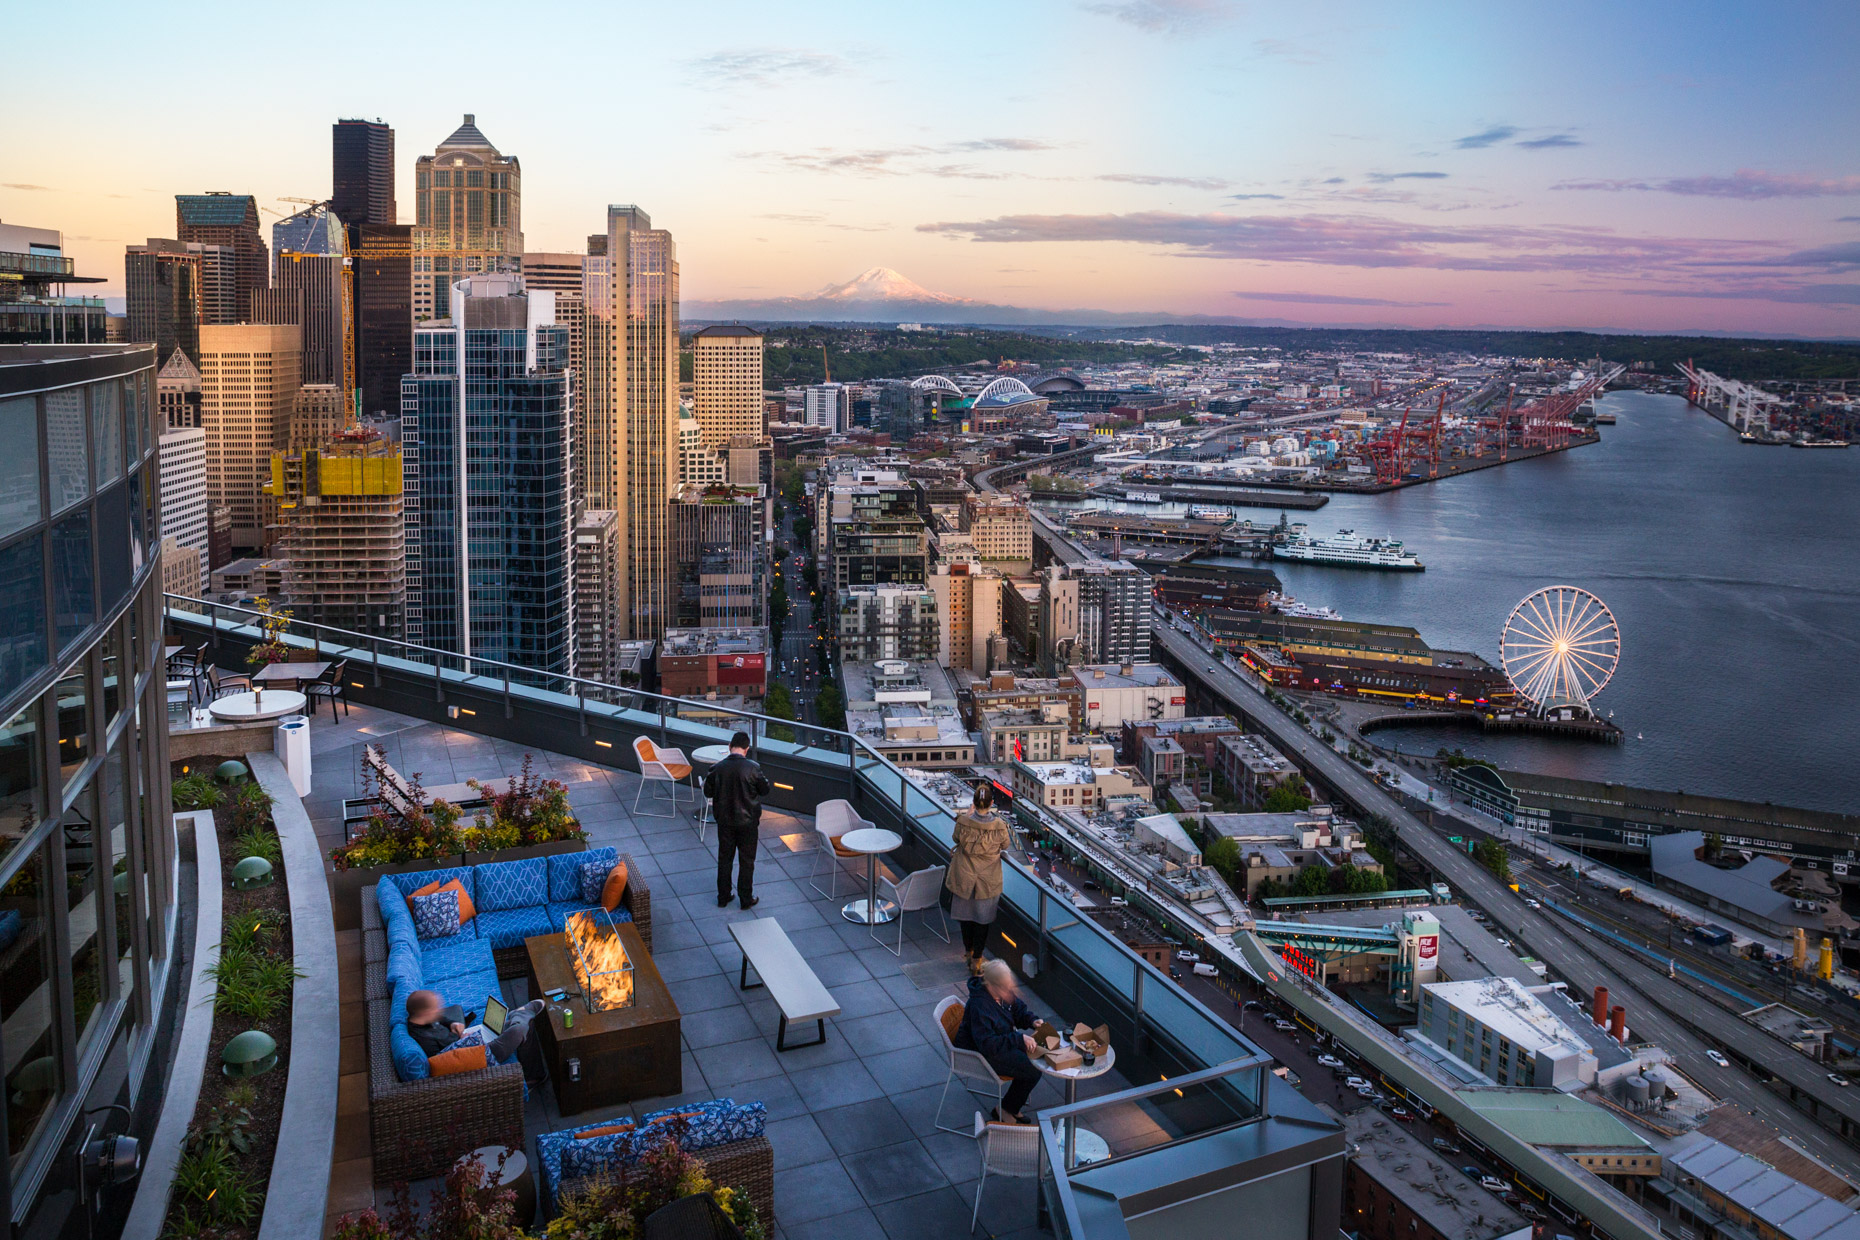 Rooftop Deck in Seattle at sunset overlooking mt. rainier and puget sound